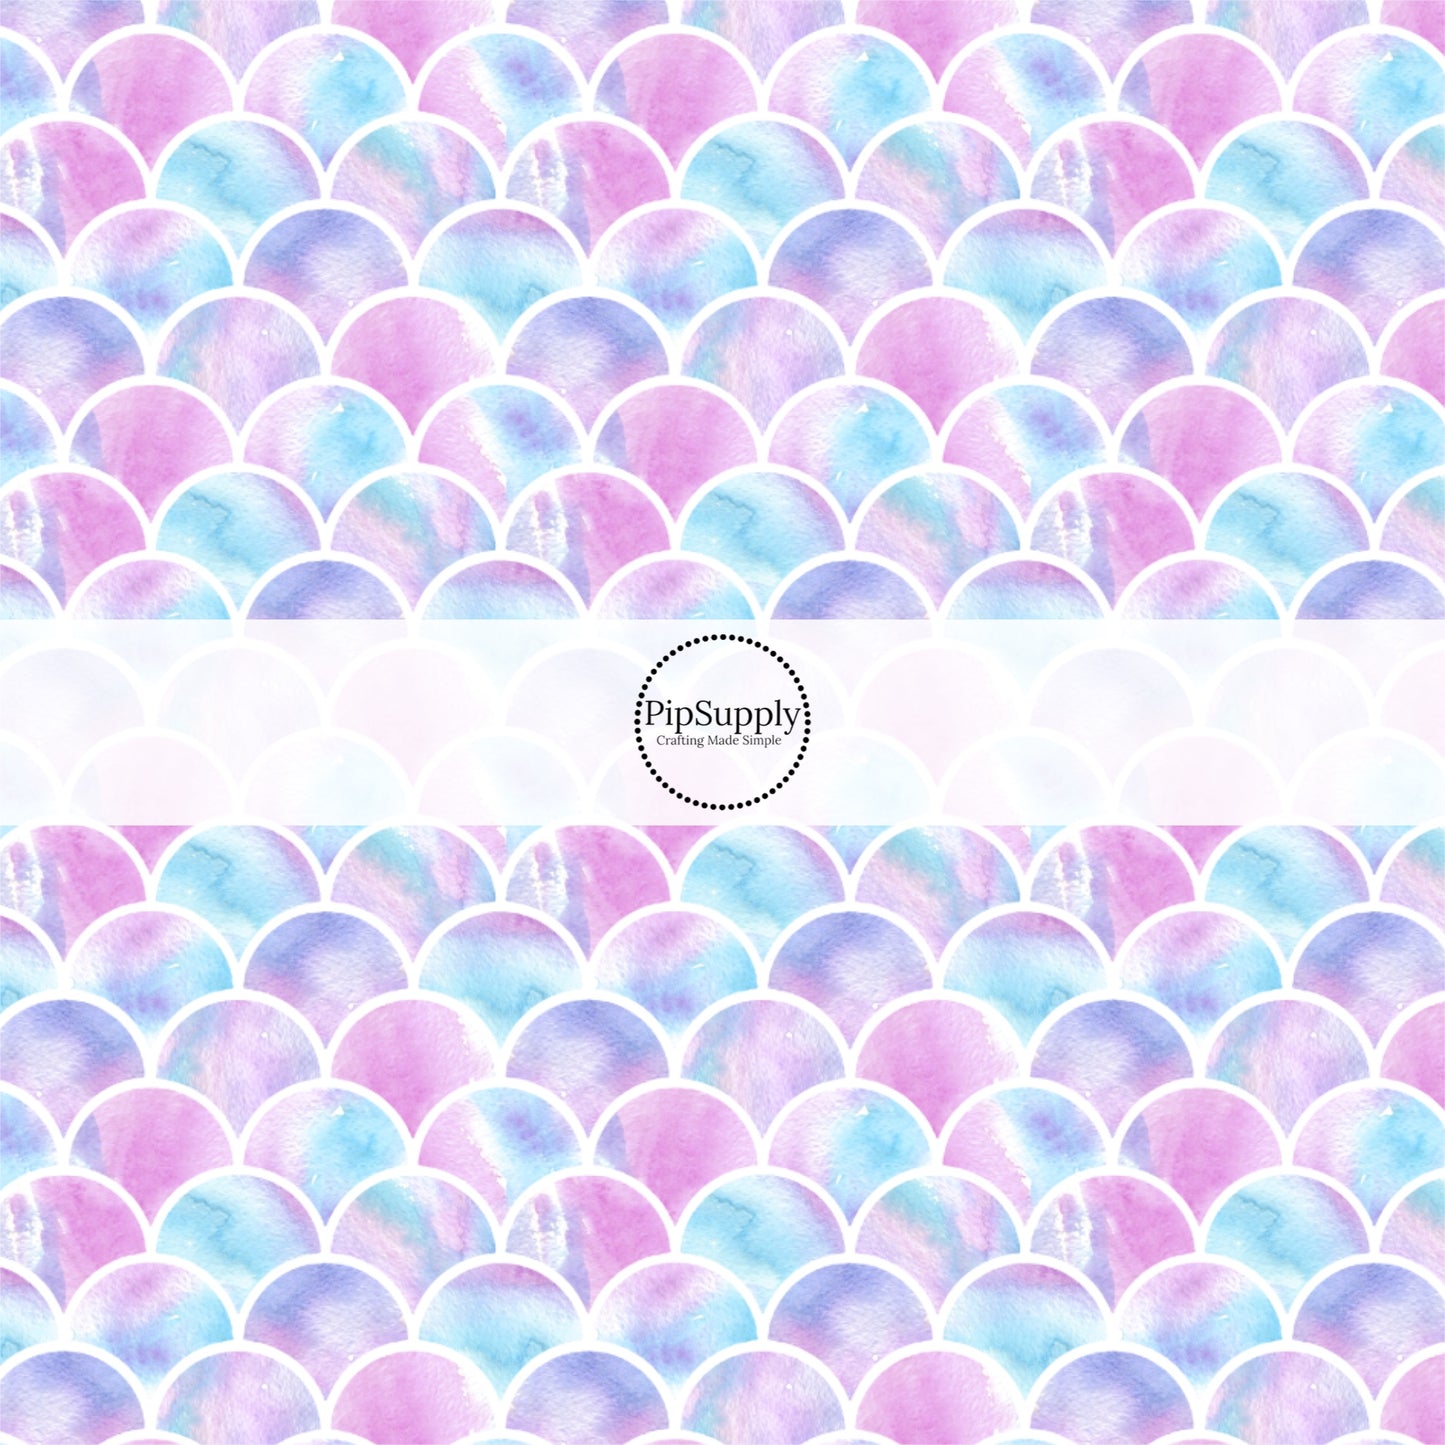 This beach fabric by the yard features pink, purple, and blue mermaid scales. This fun summer themed fabric can be used for all your sewing and crafting needs!